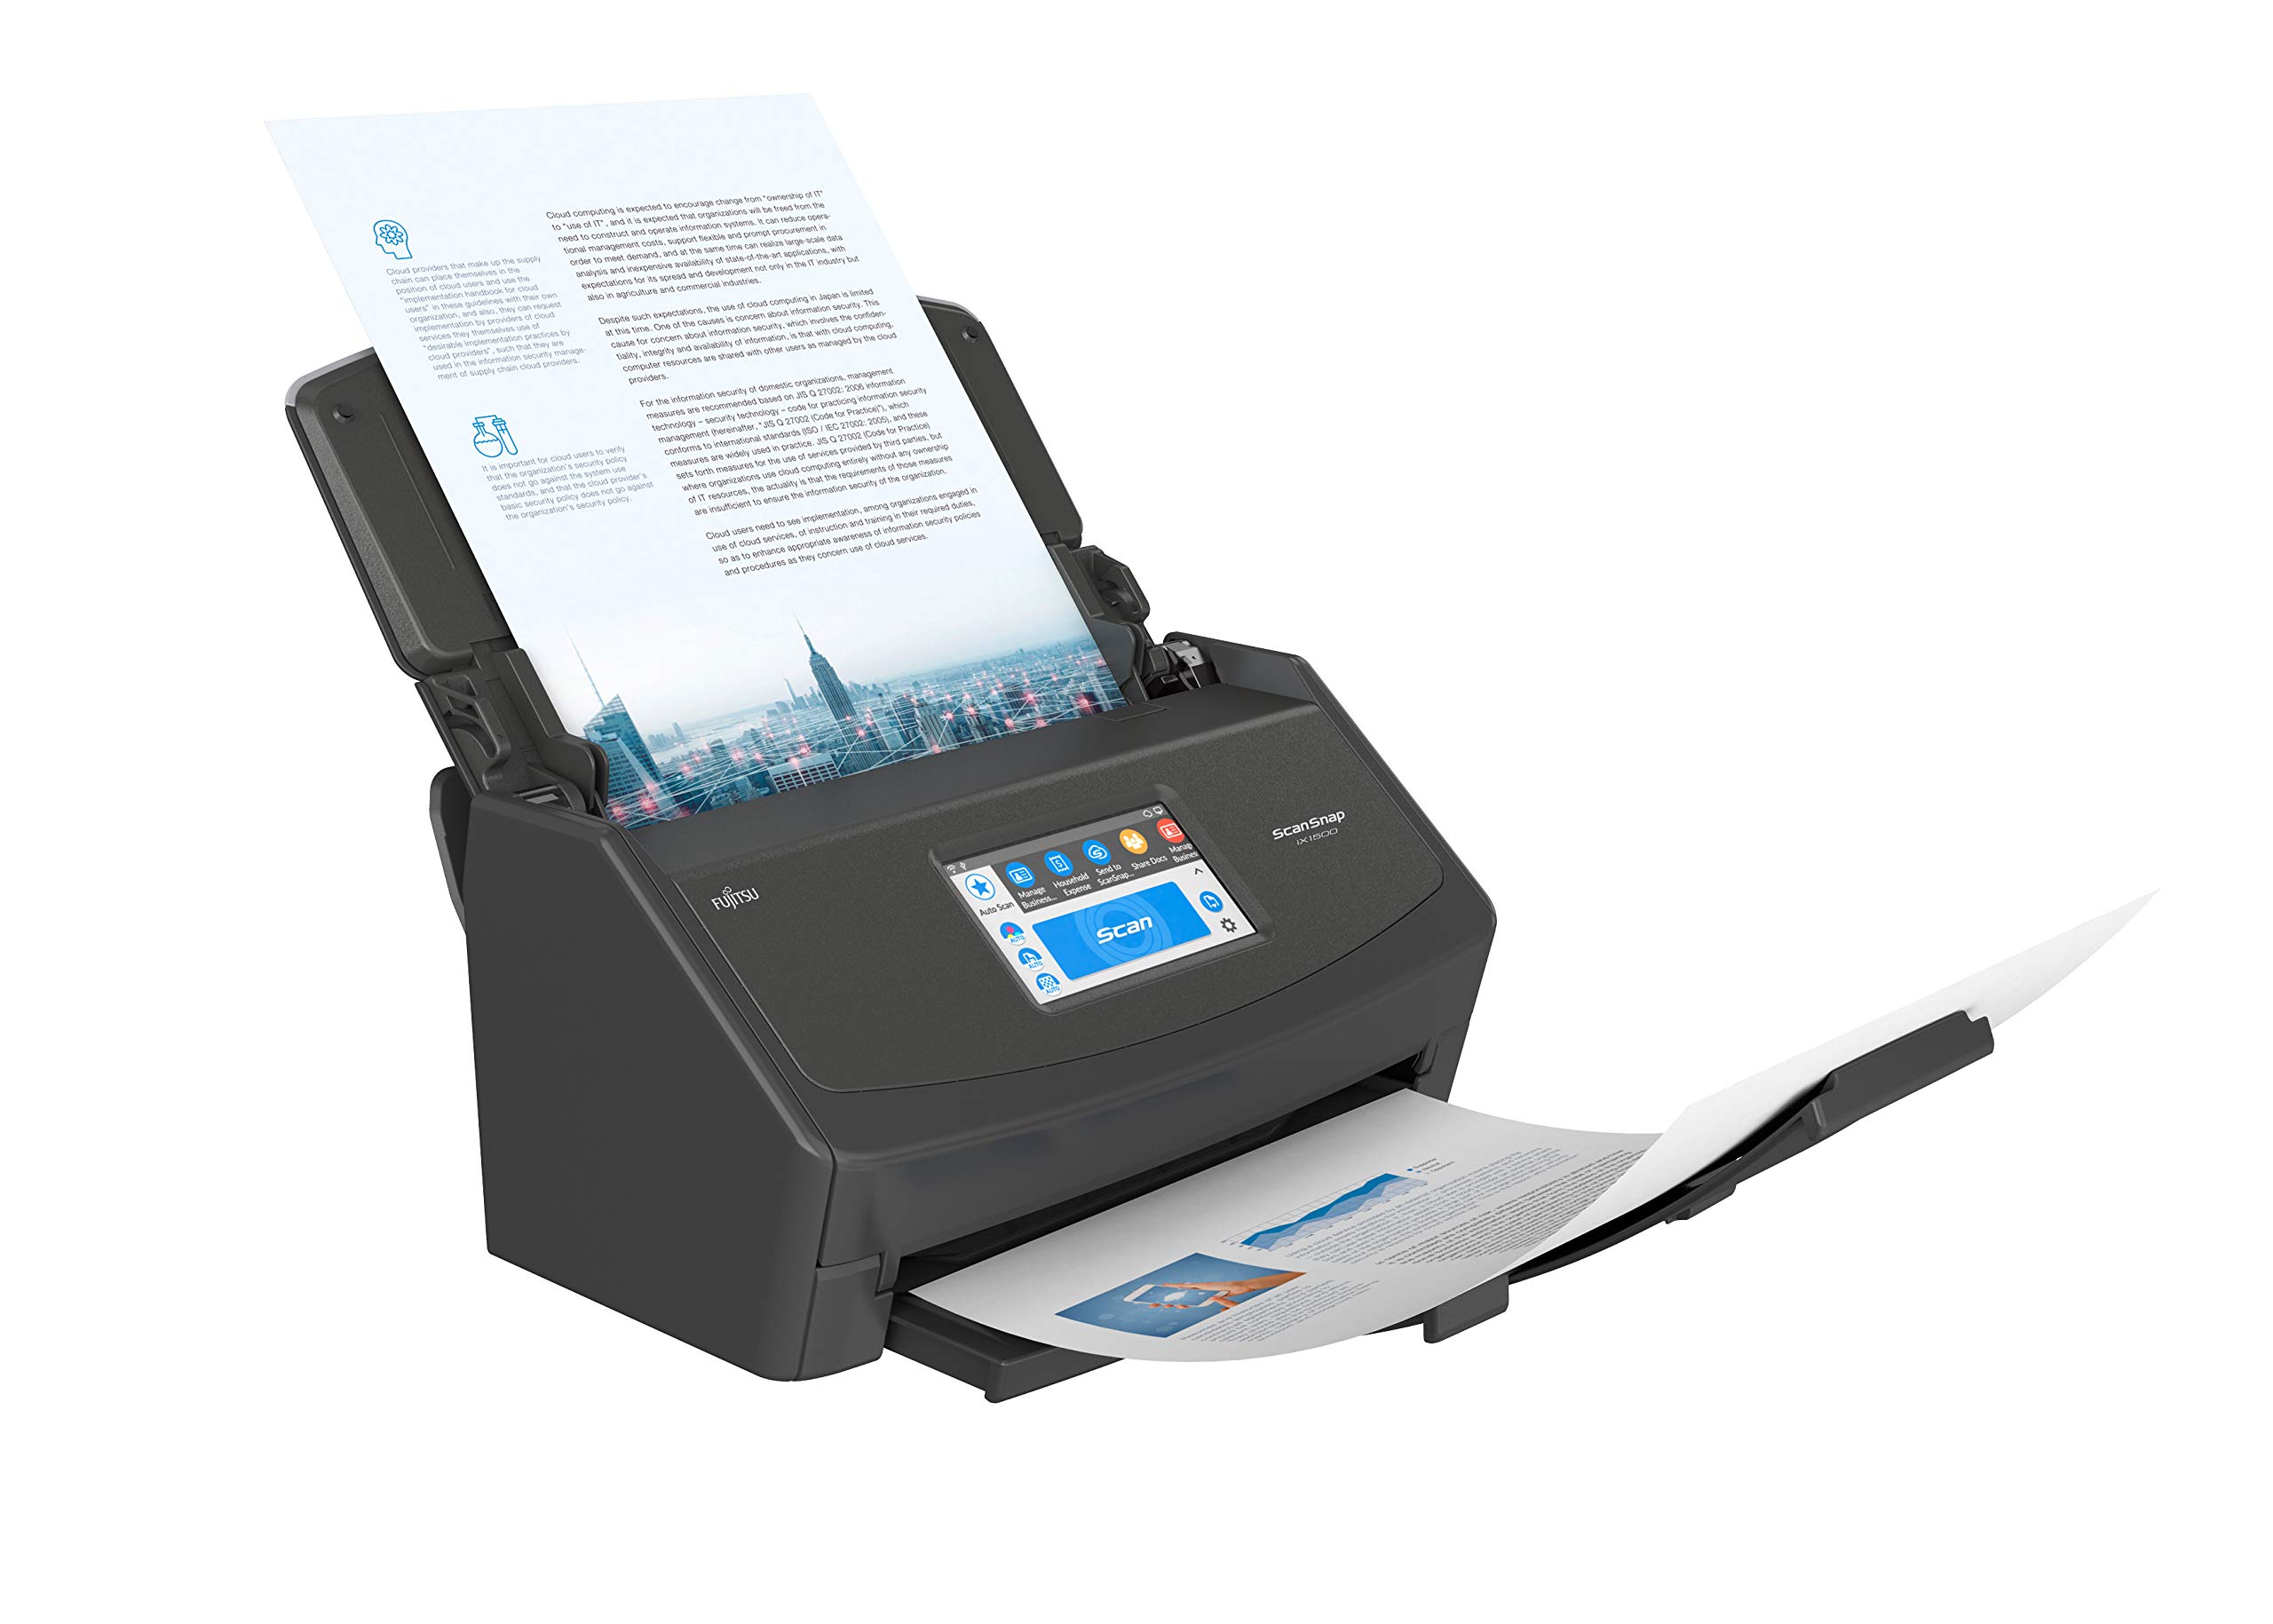 Fujitsu ScanSnap iX1500 Color Duplex Document Scanner with Touch Screen for Mac and PC (Black Model, 2020 Release)